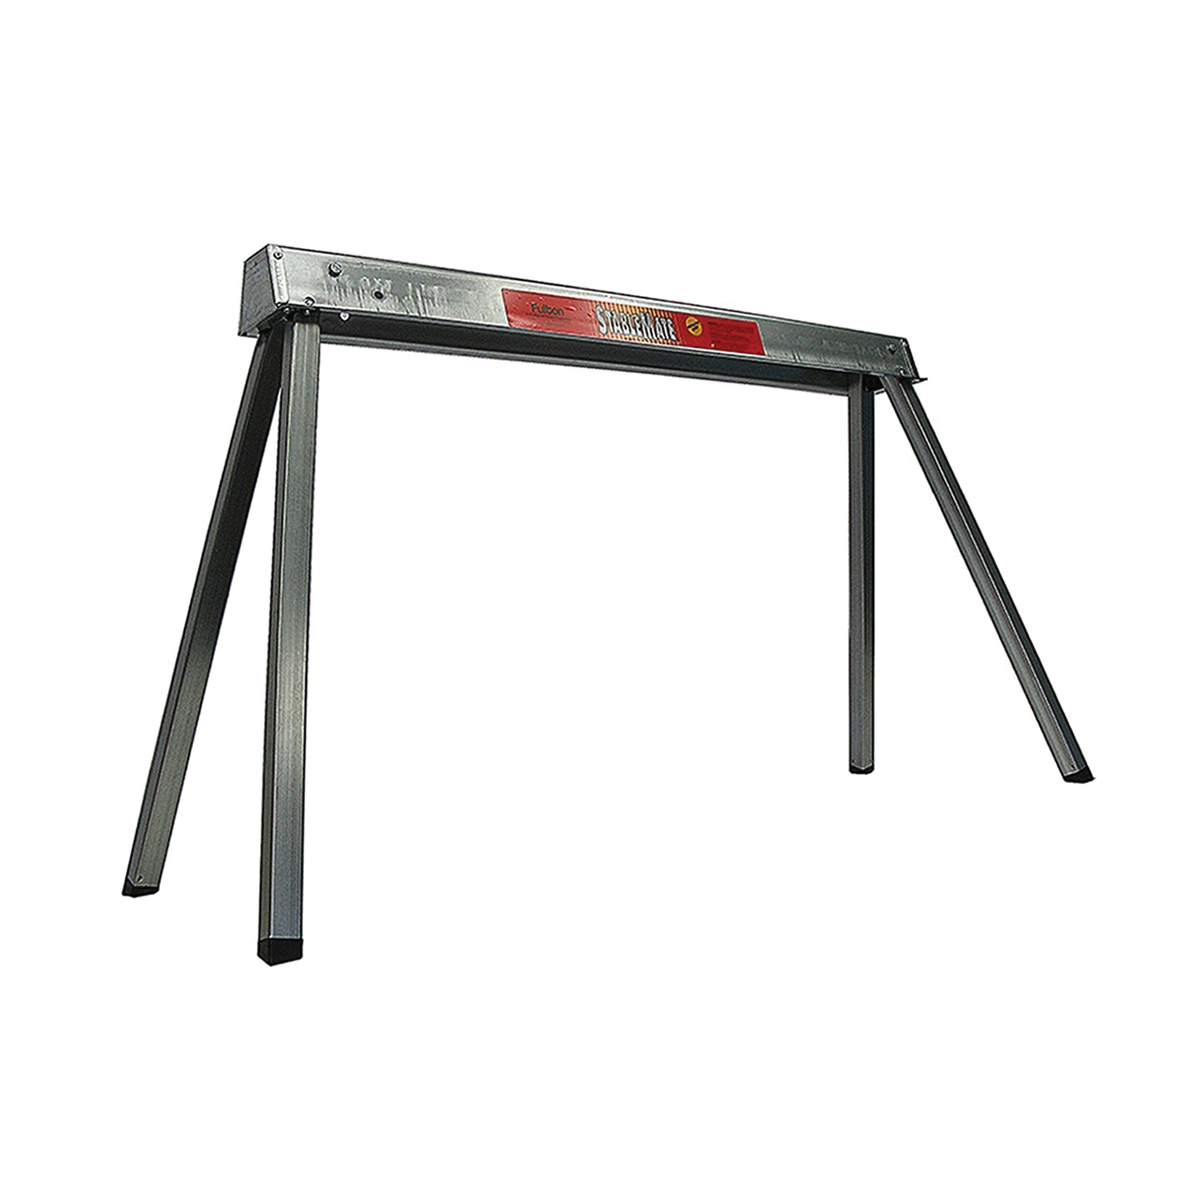 StableMate QP4230-12 Folding Sawhorse, 1000 lb, 30 in H, Steel